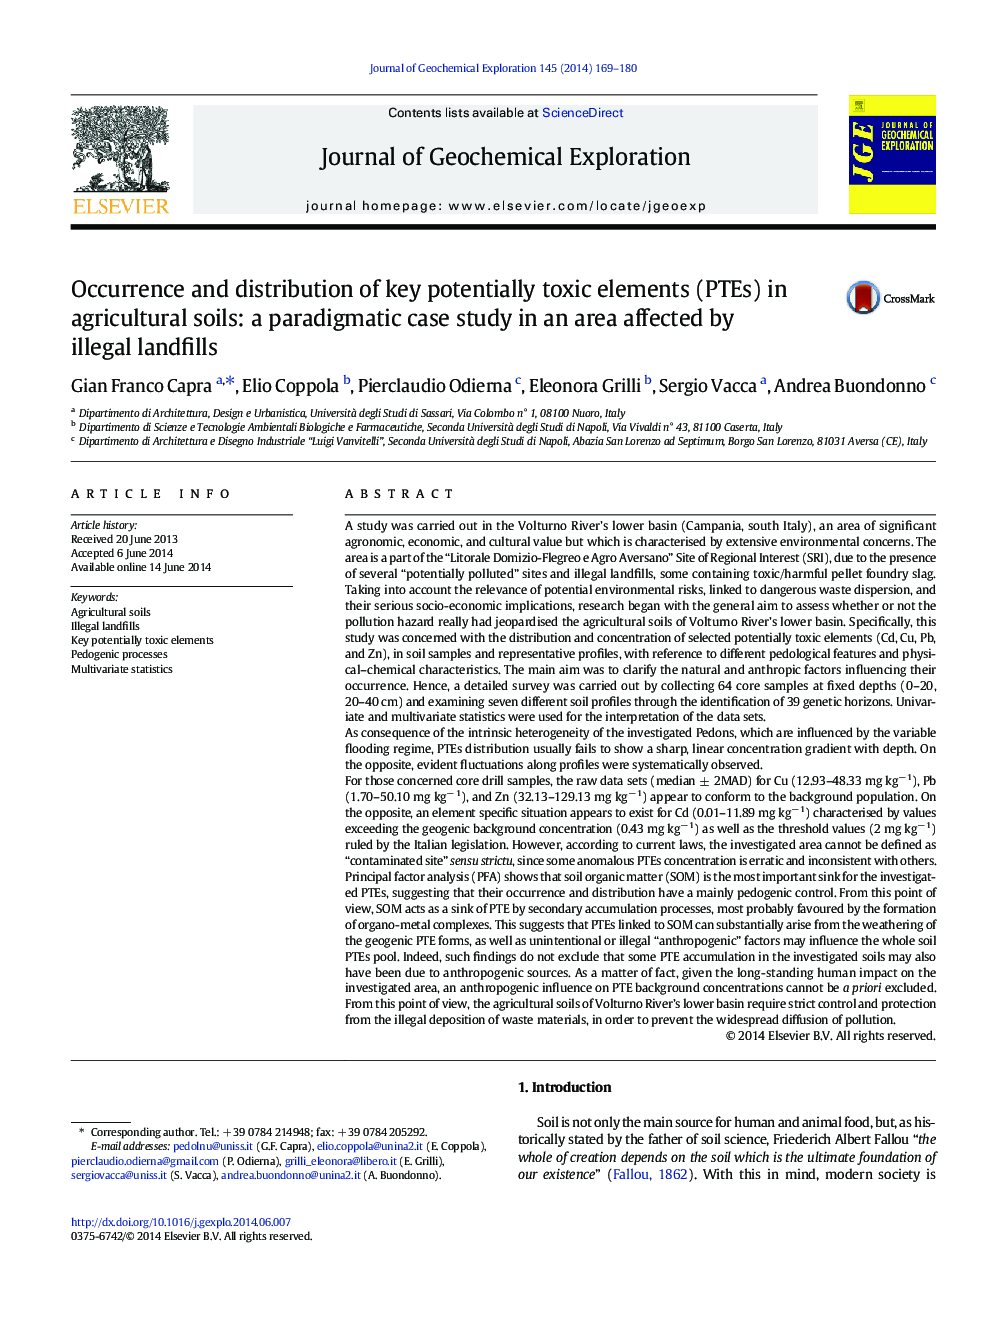 Occurrence and distribution of key potentially toxic elements (PTEs) in agricultural soils: a paradigmatic case study in an area affected by illegal landfills